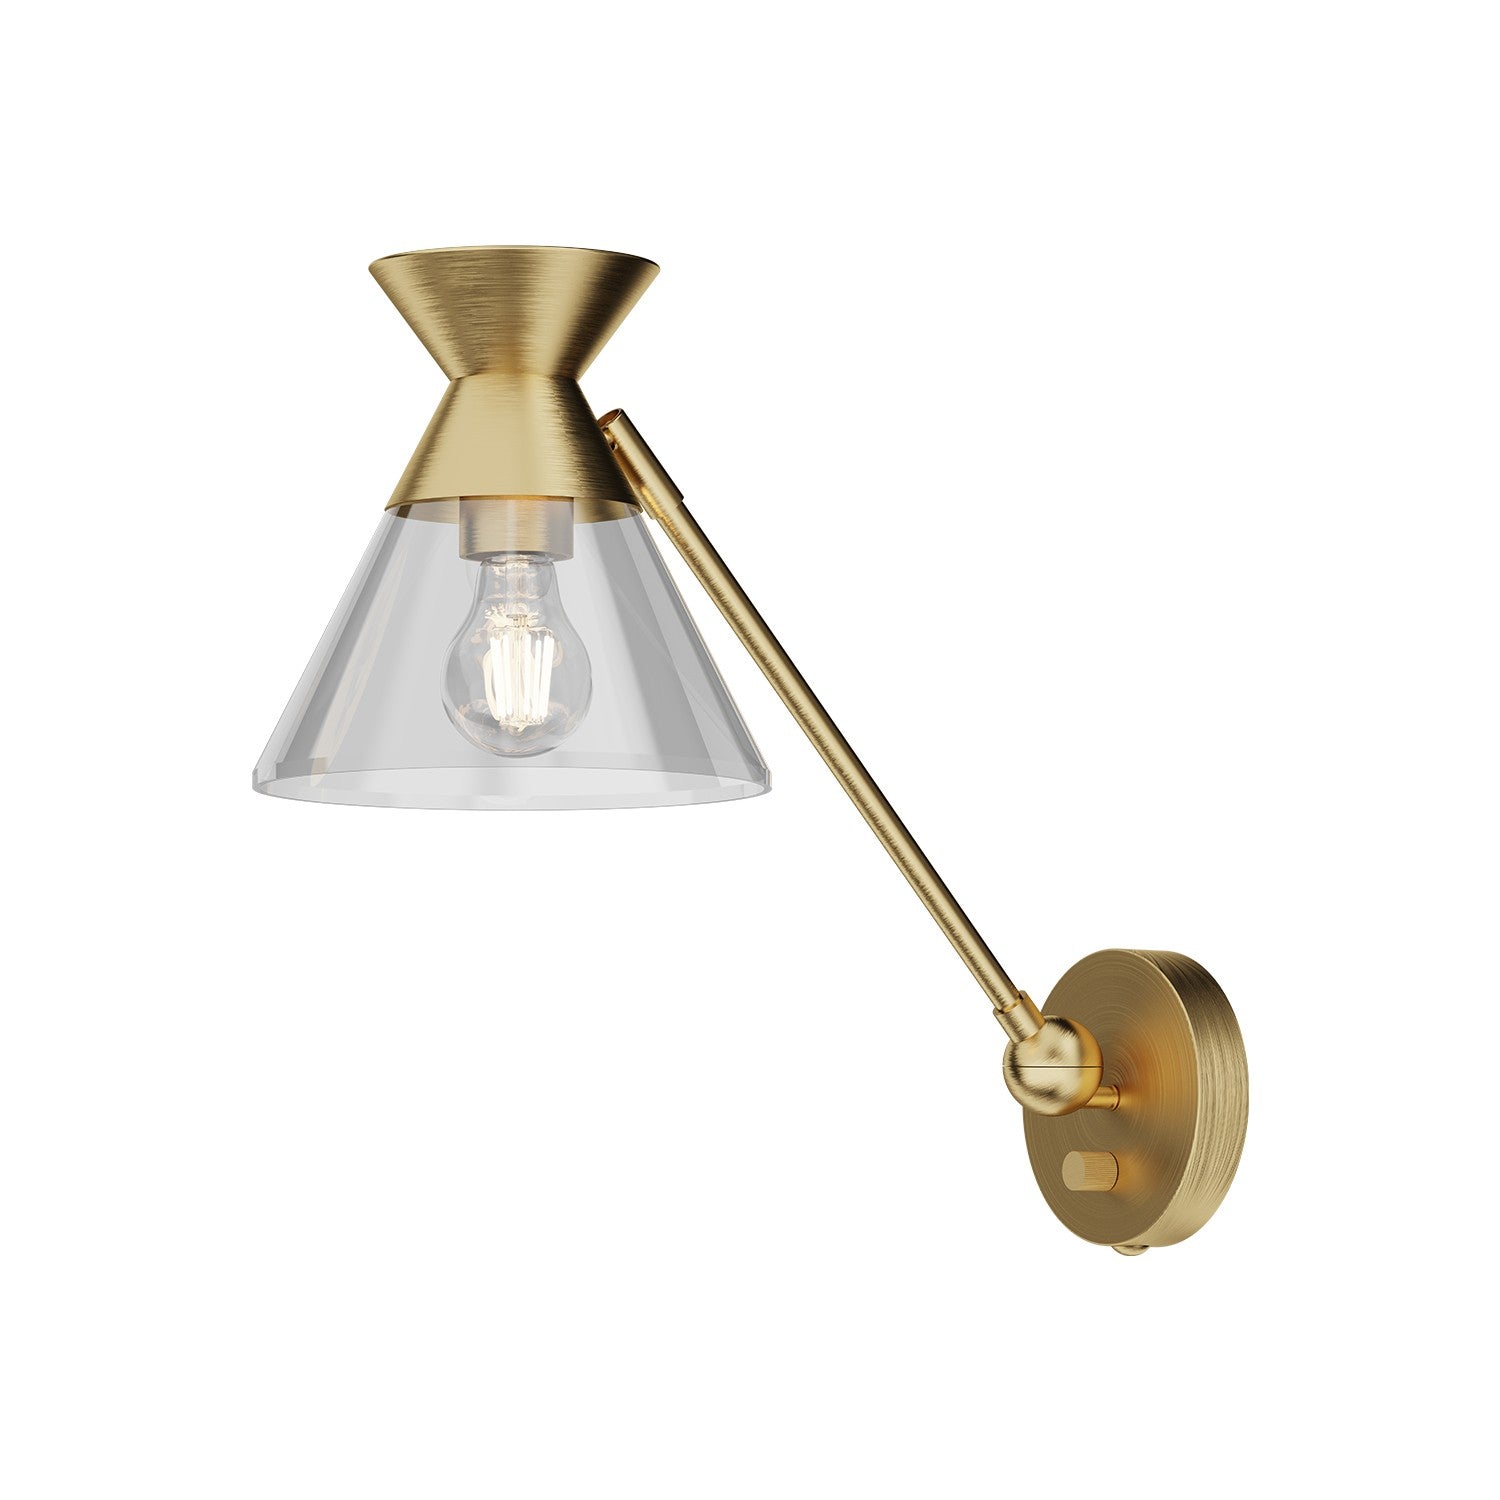 Alora Canada - WV521008BGCL - One Light Wall Sconce - Mauer - Brushed Gold/Clear Glass